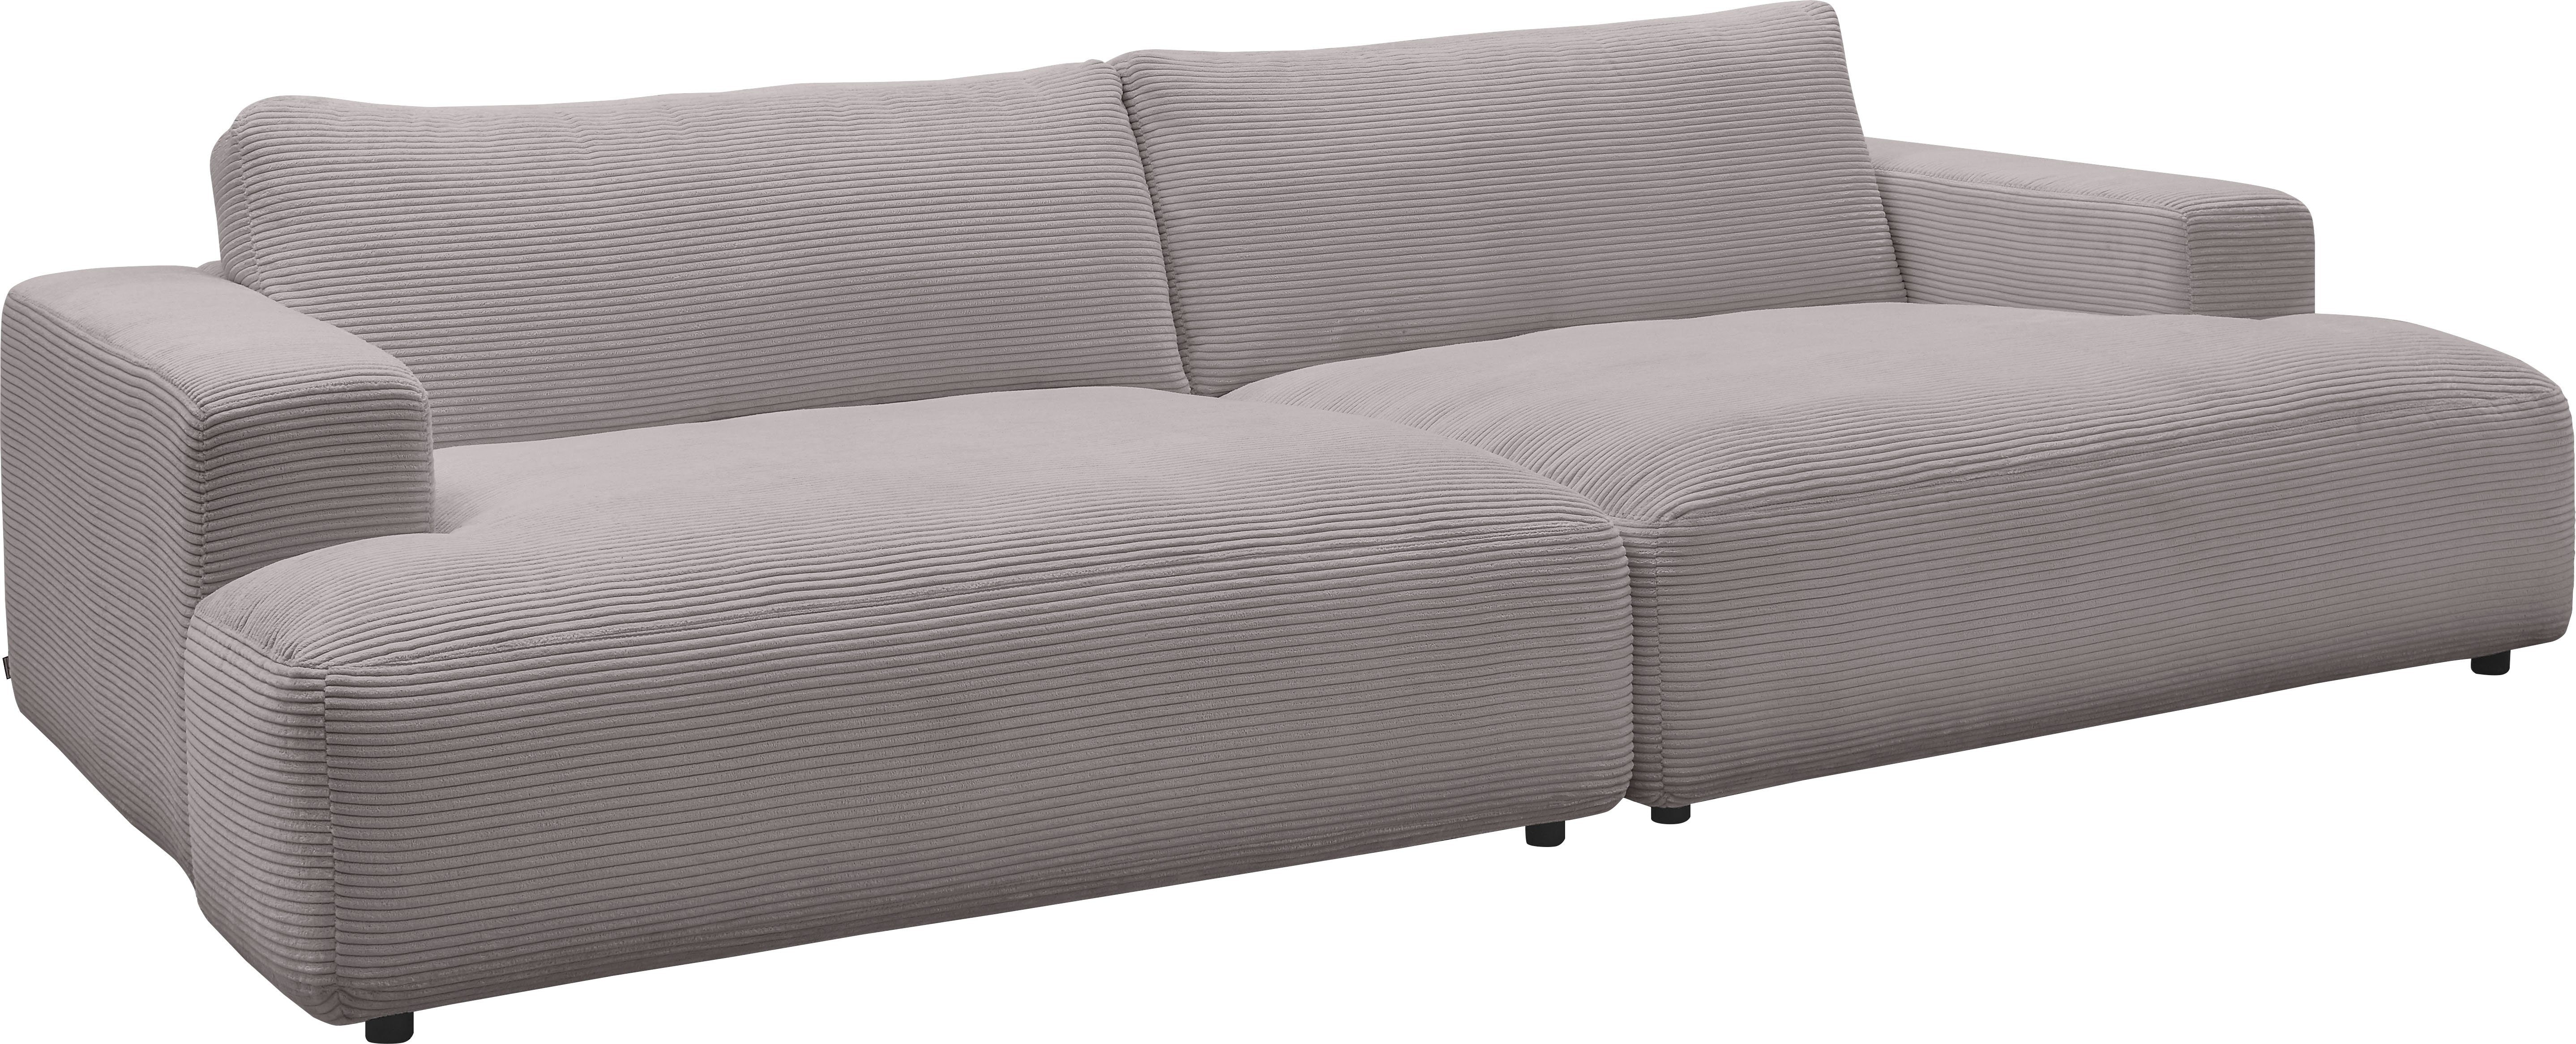 branded cm Loungesofa 292 Cord-Bezug, Musterring Breite by GALLERY M grey Lucia,